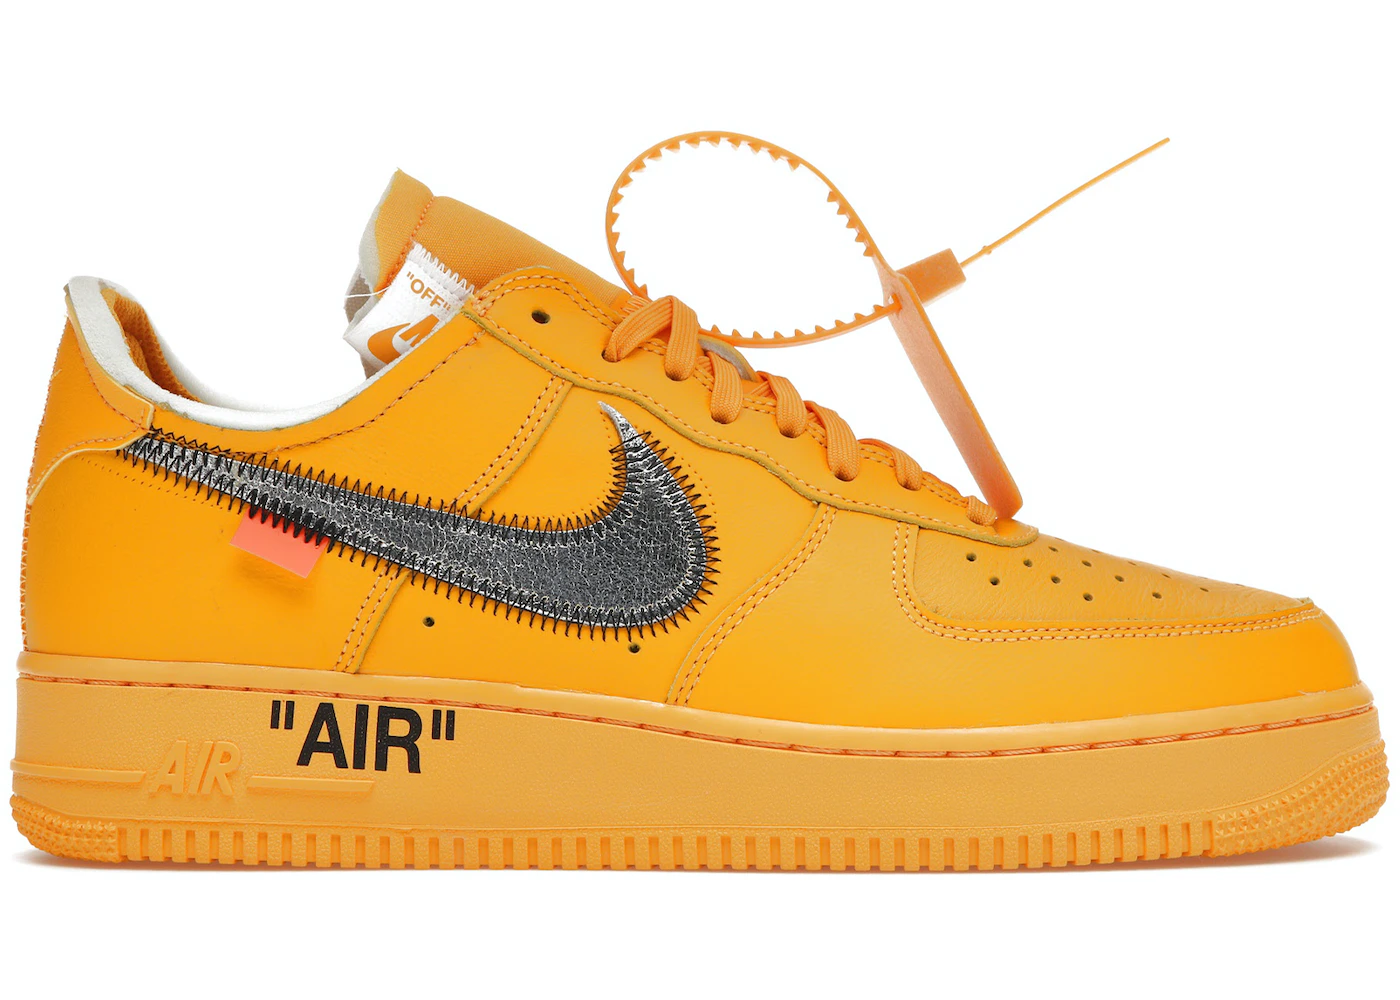 off white air force 1 red